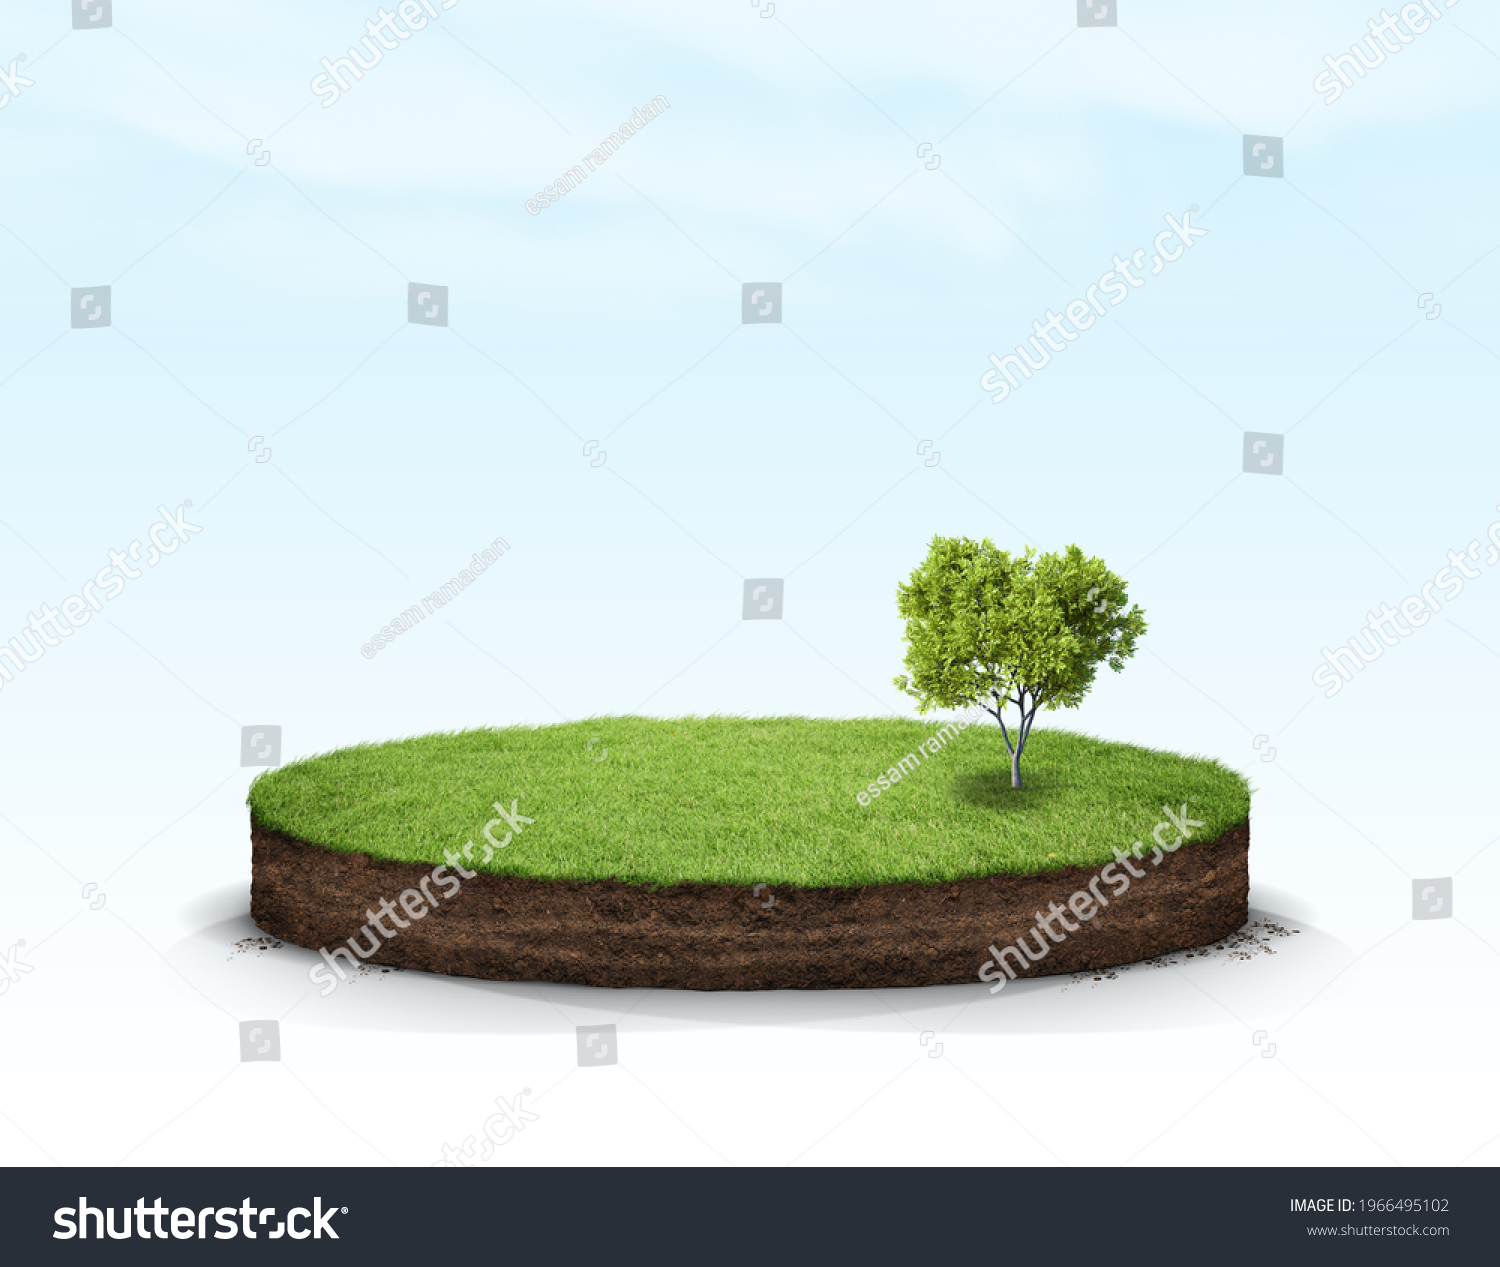 3D Illustration round soil ground cross section with earth land and green grass, realistic 3D rendering circle cutaway terrain floor with rock isolated #1966495102